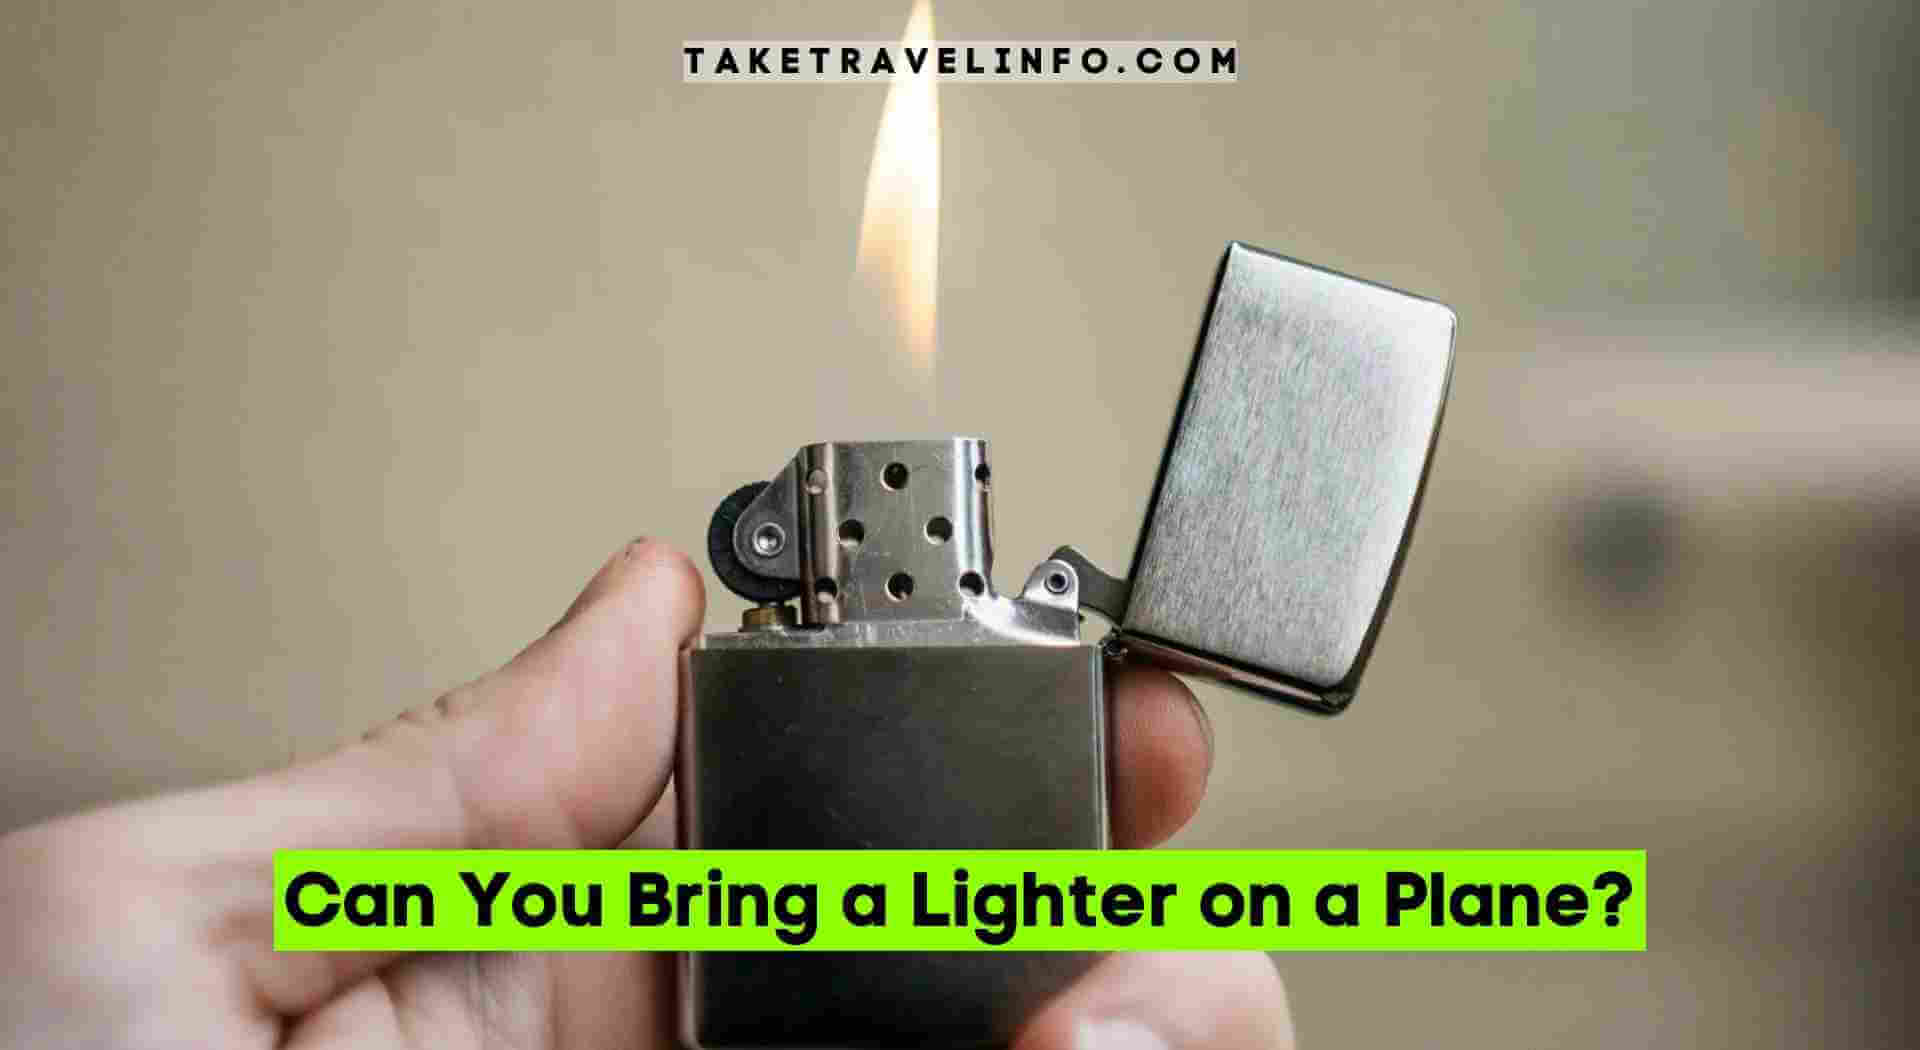 Can You Bring a Lighter on a Plane?